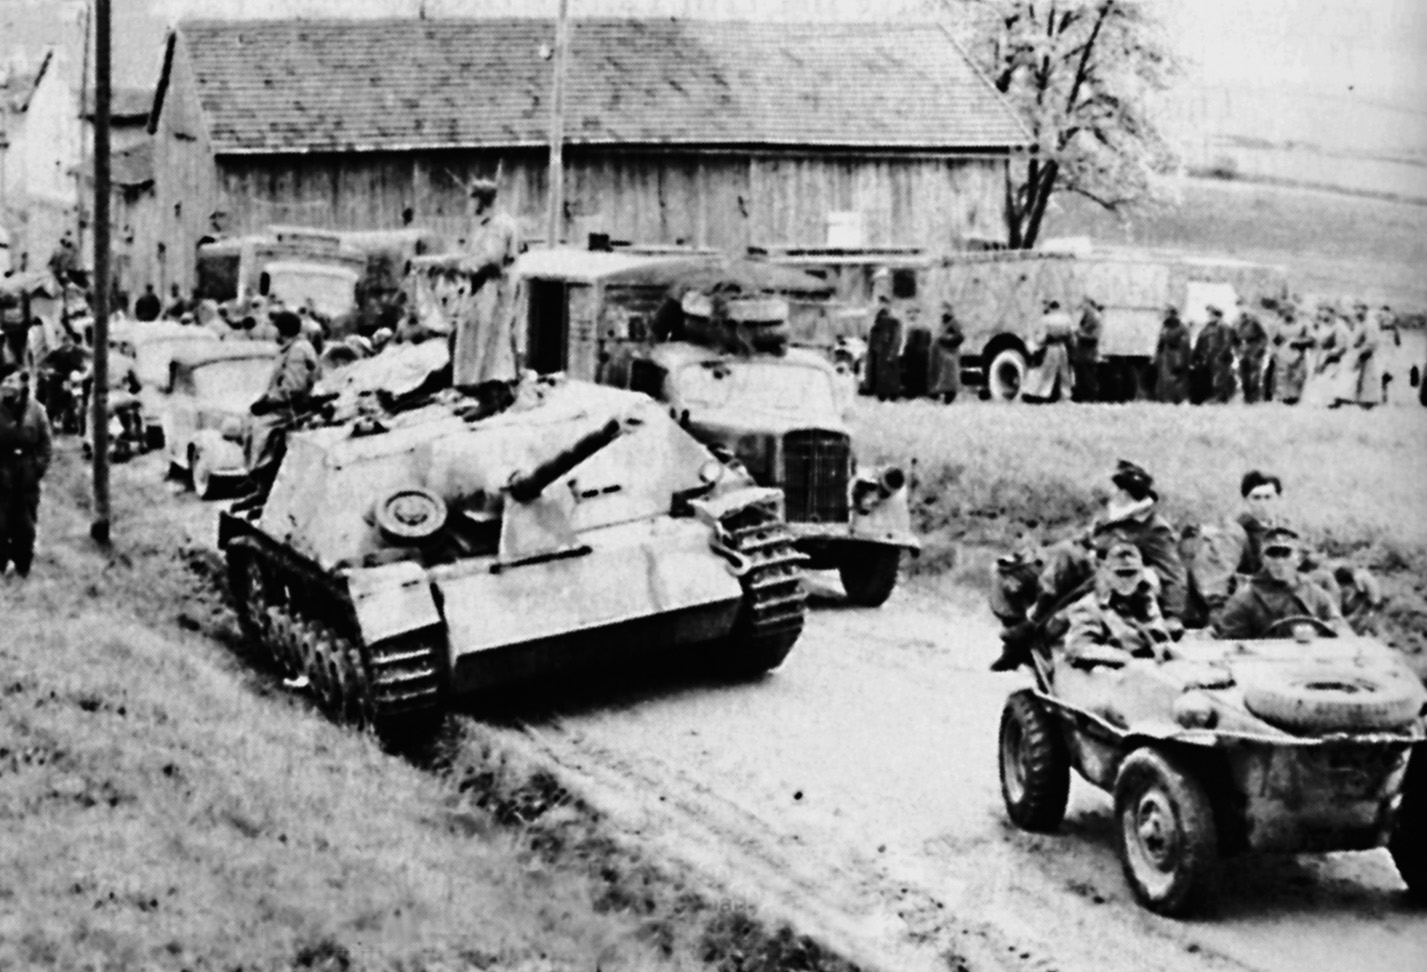 Members of the 11th Panzer abandon tanks and other motorized vehicles at one of the two designated assembly areas.